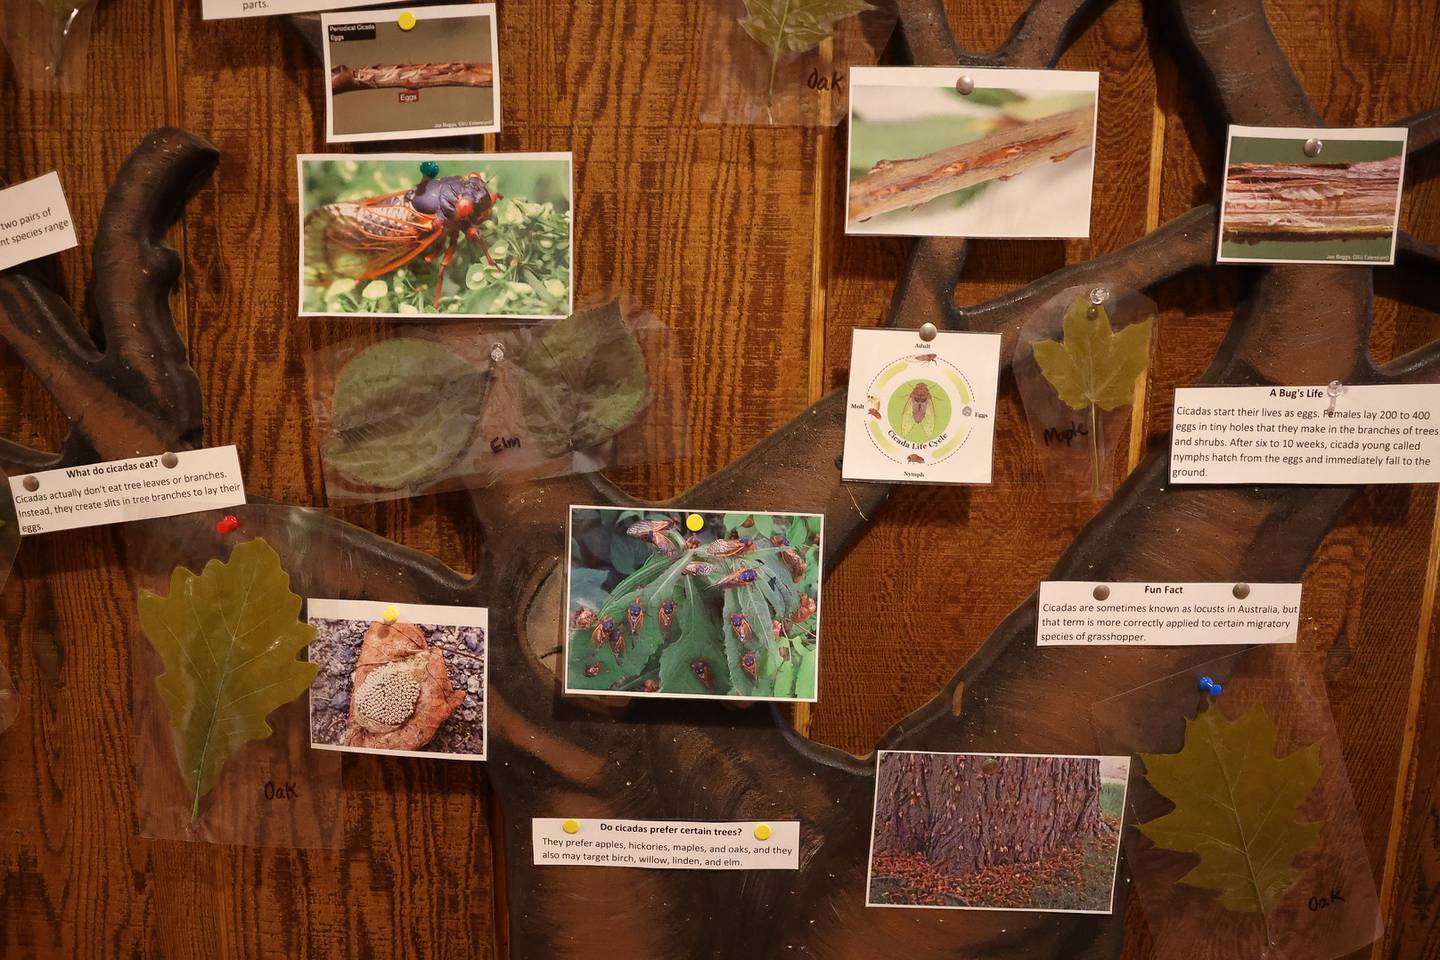 Pilcher Park Nature Center in Joliet created an informative cicada display on Thursday, May 16, 2024.